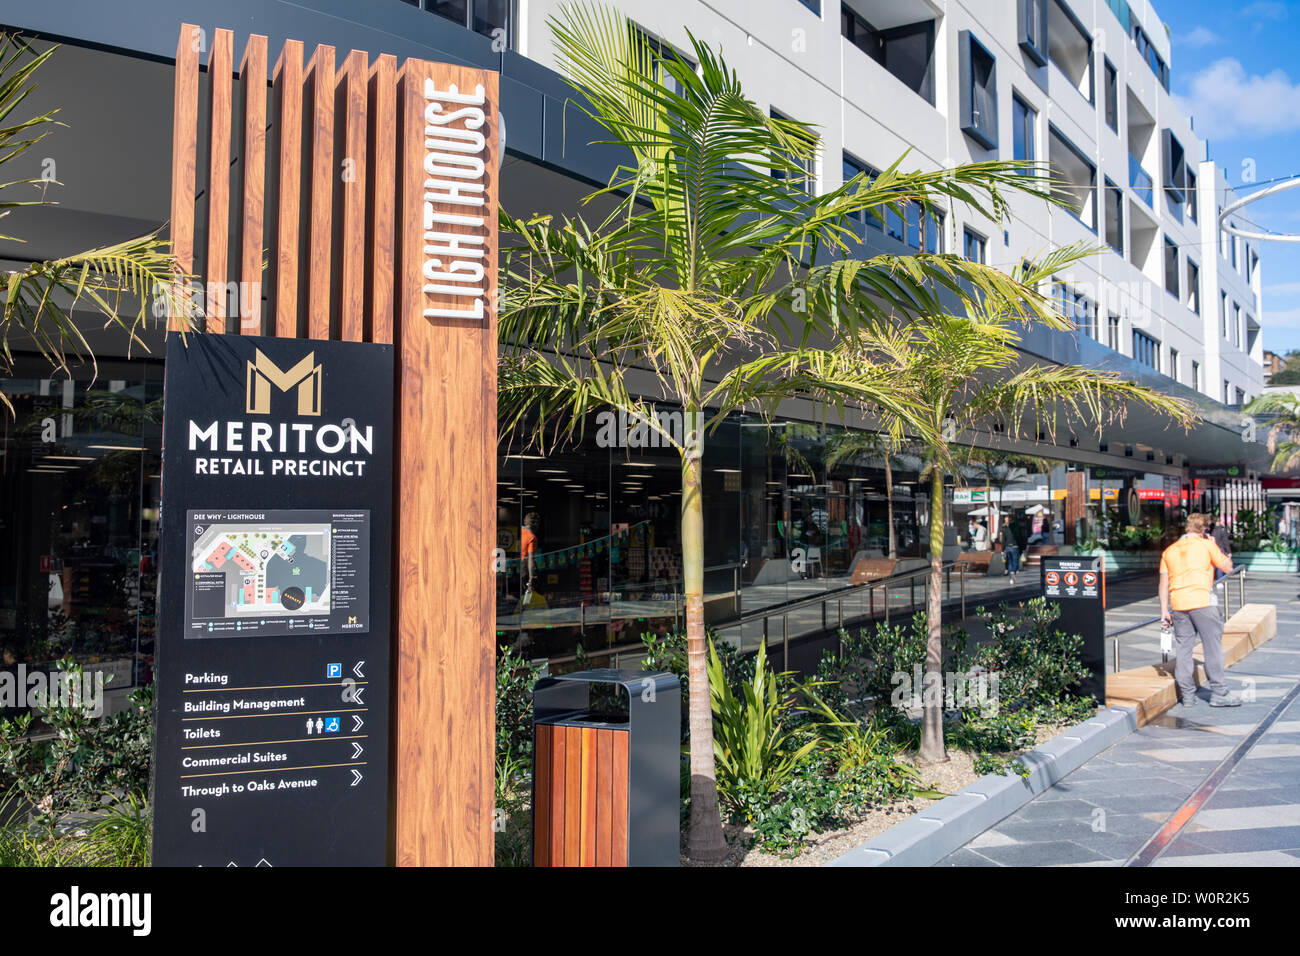 Sydney,Meriton living and retail precinct in Dee Why, mixed use development of apartments, cafes and retail,Sydney,Australia Stock Photo